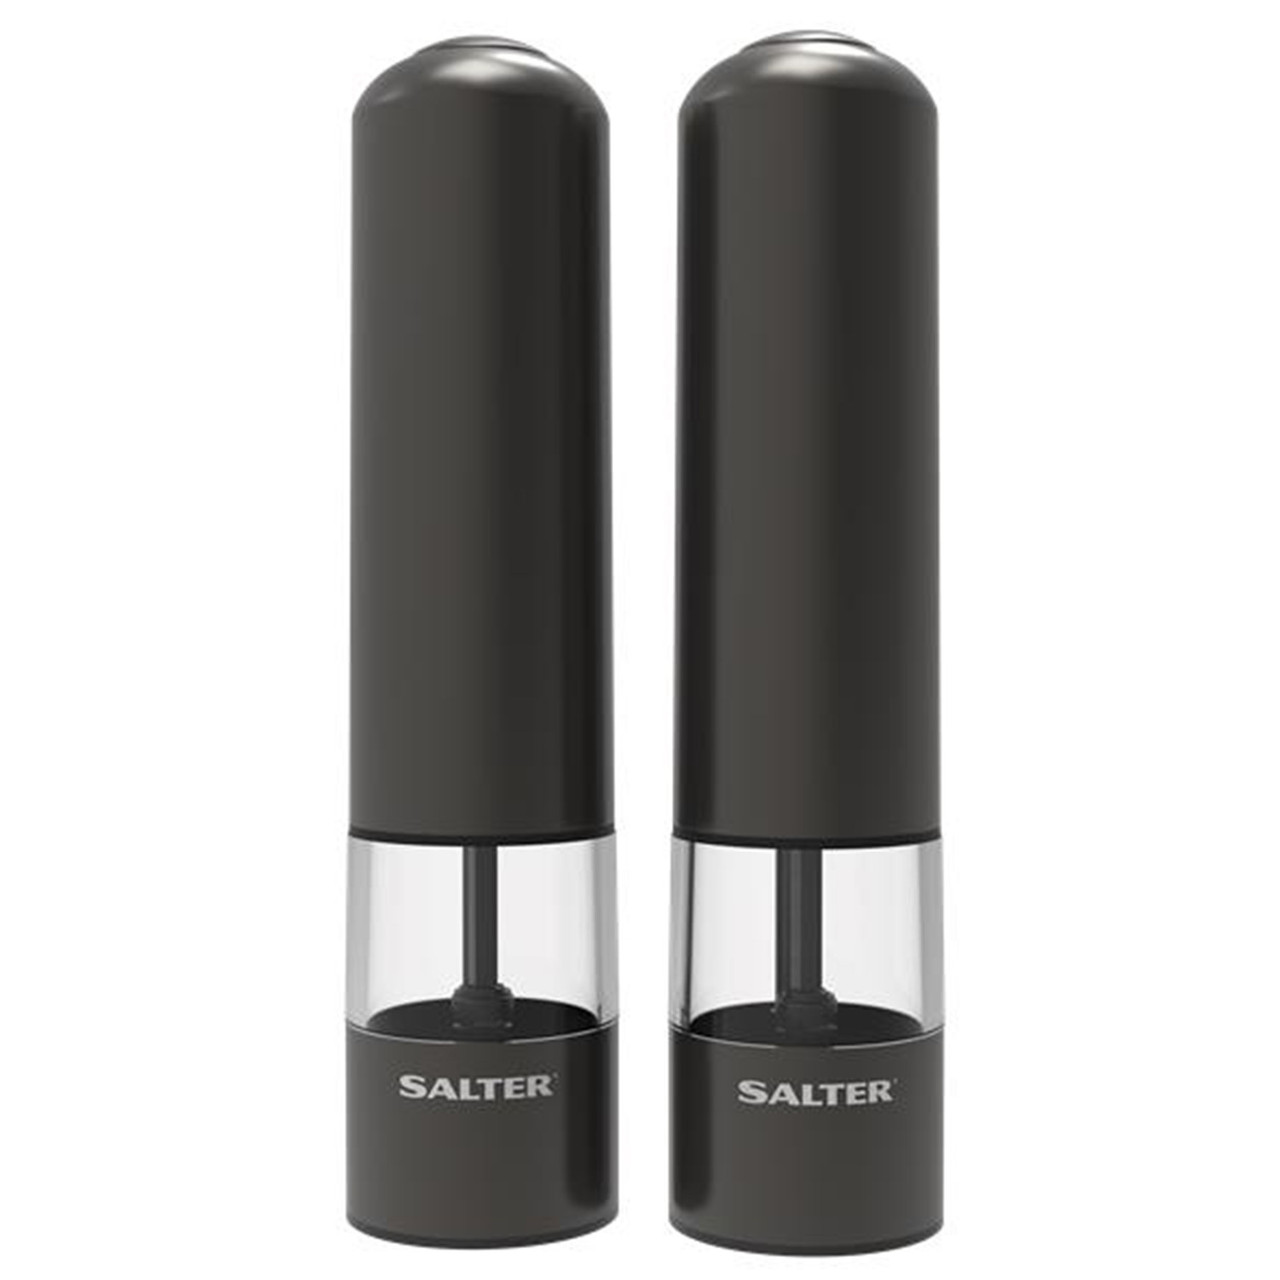 Electric Salt and Pepper Grinder Set USB Rechargeable - USB Type-C